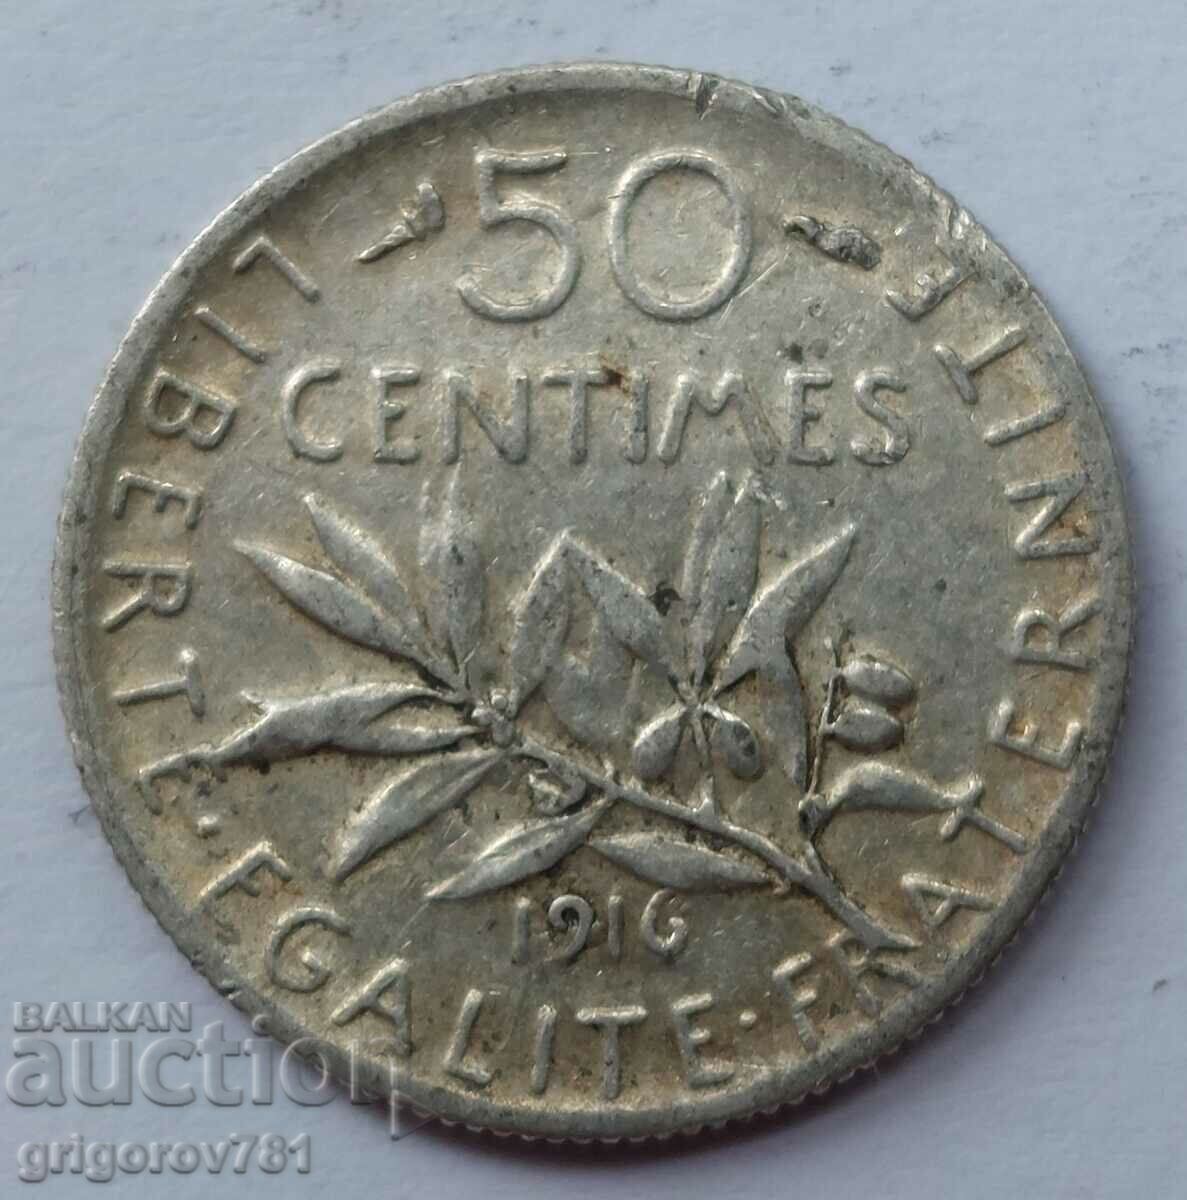 50 centimes silver France 1916 - silver coin №51